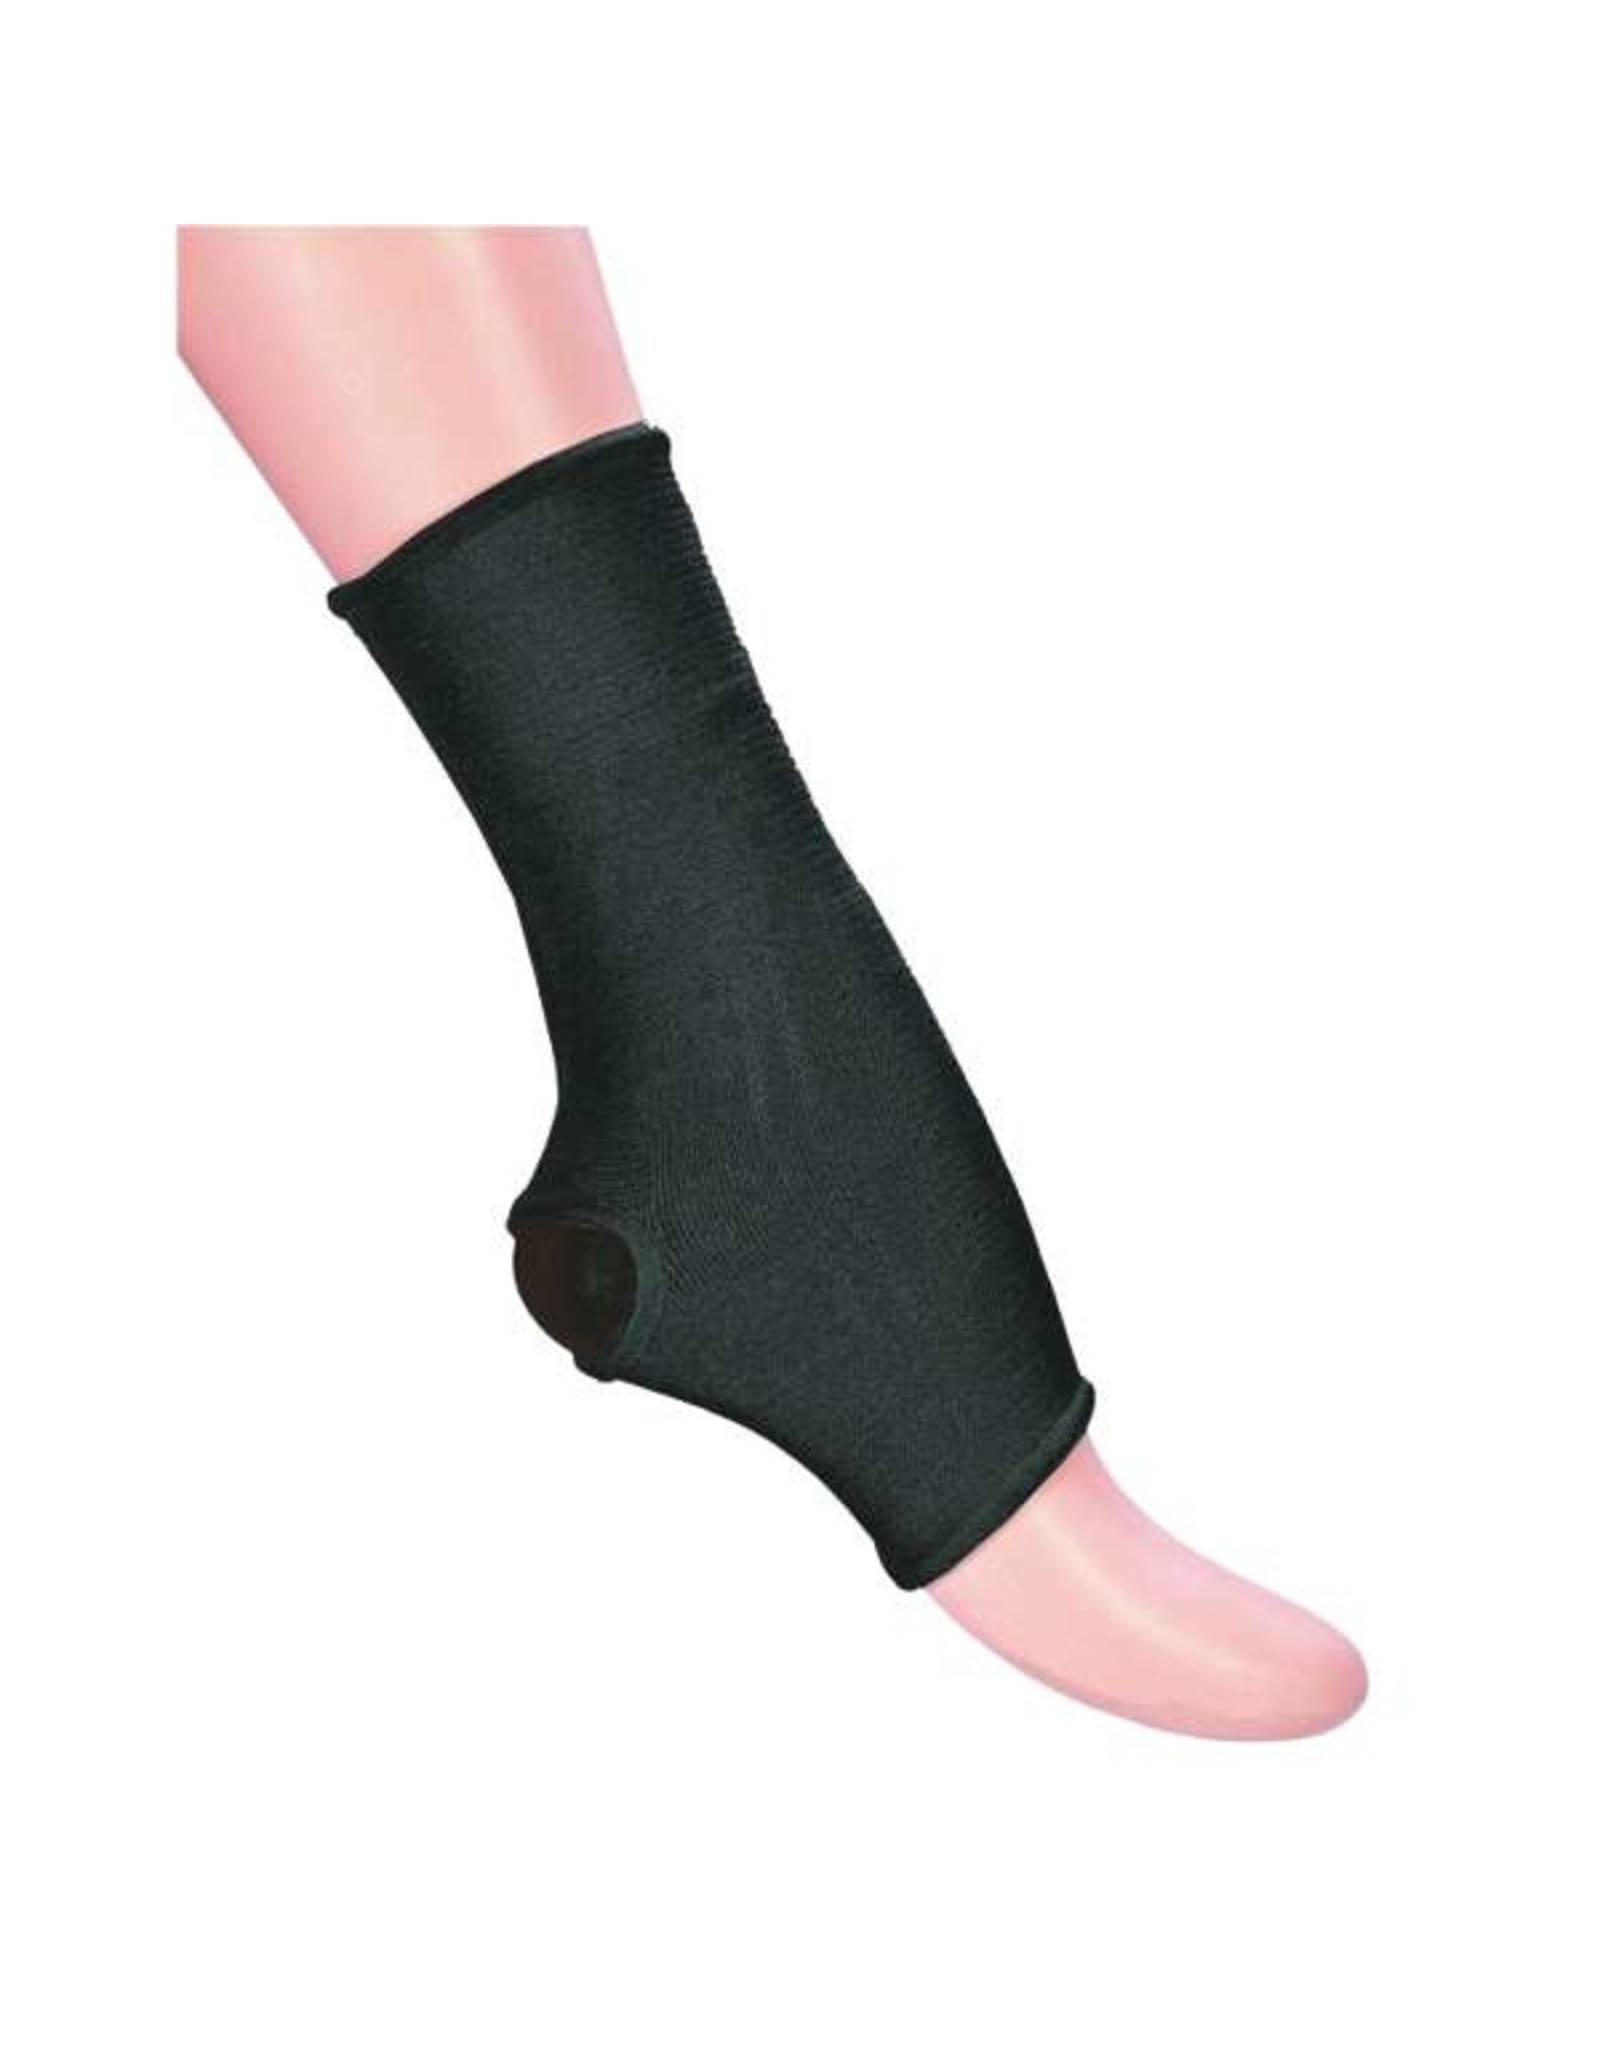 Bruce Lee Ankle Guard